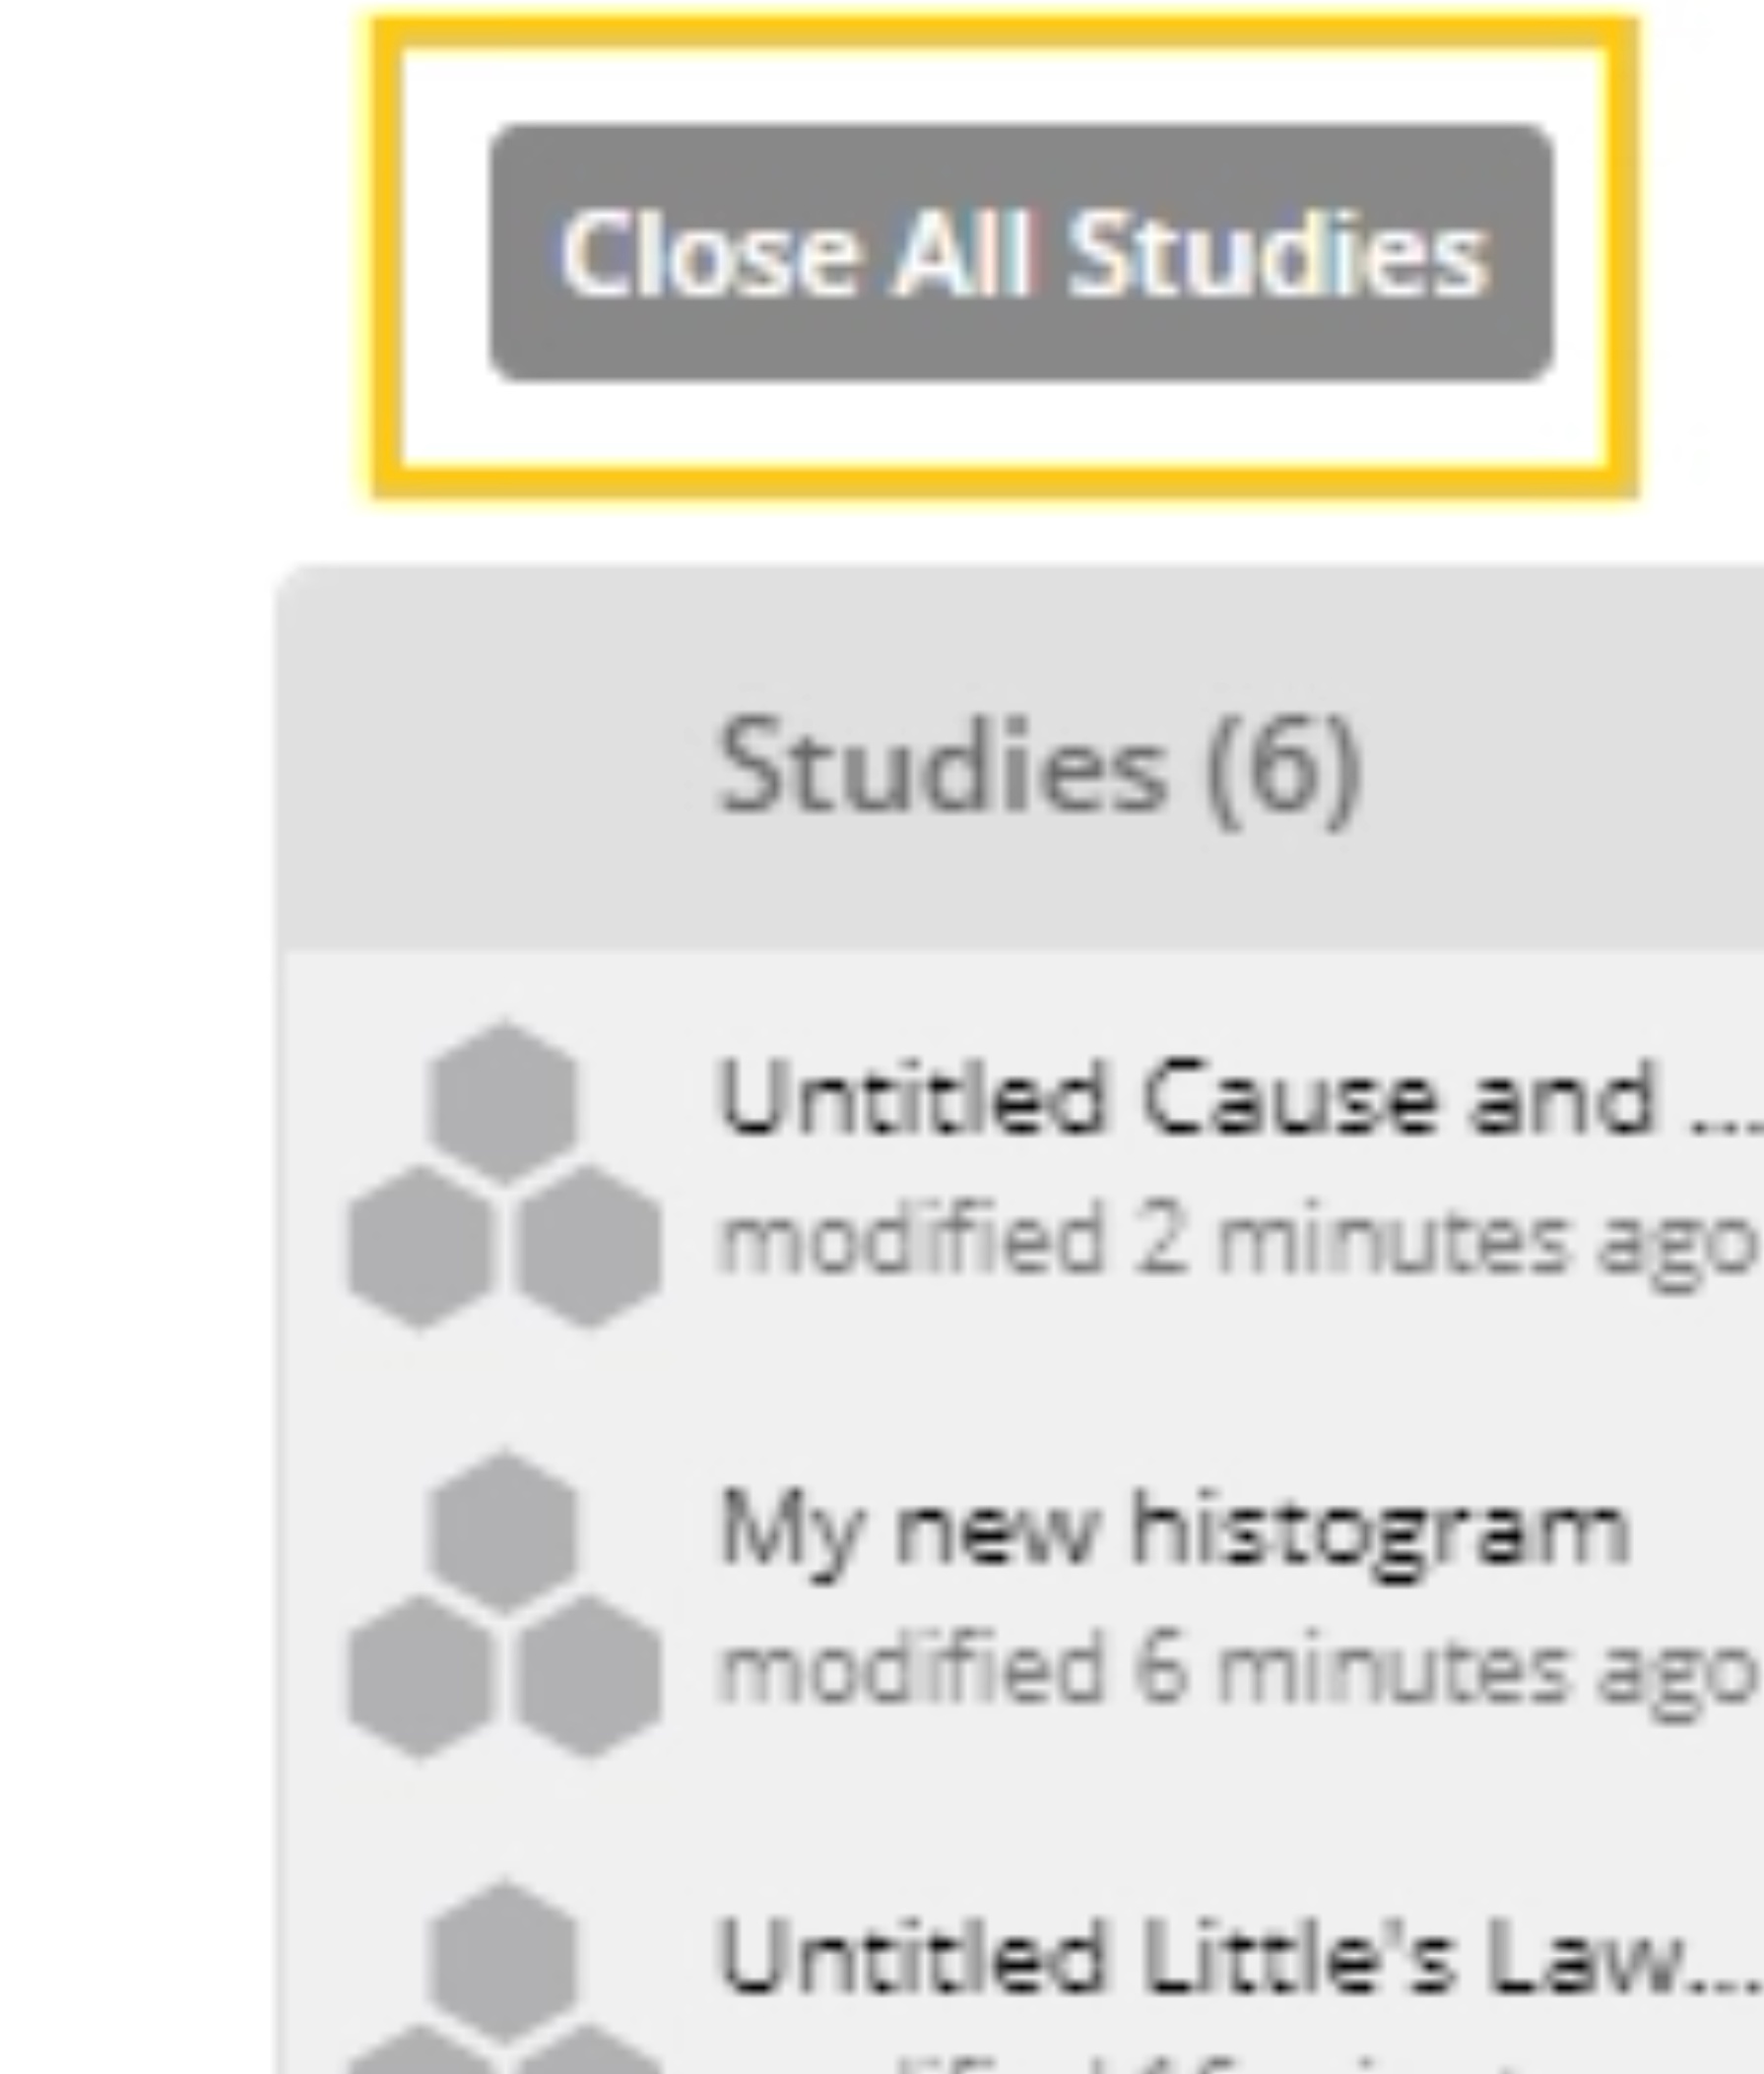 Screenshot of EngineRoom studies panel with "Close All Studies Button Highlighted"